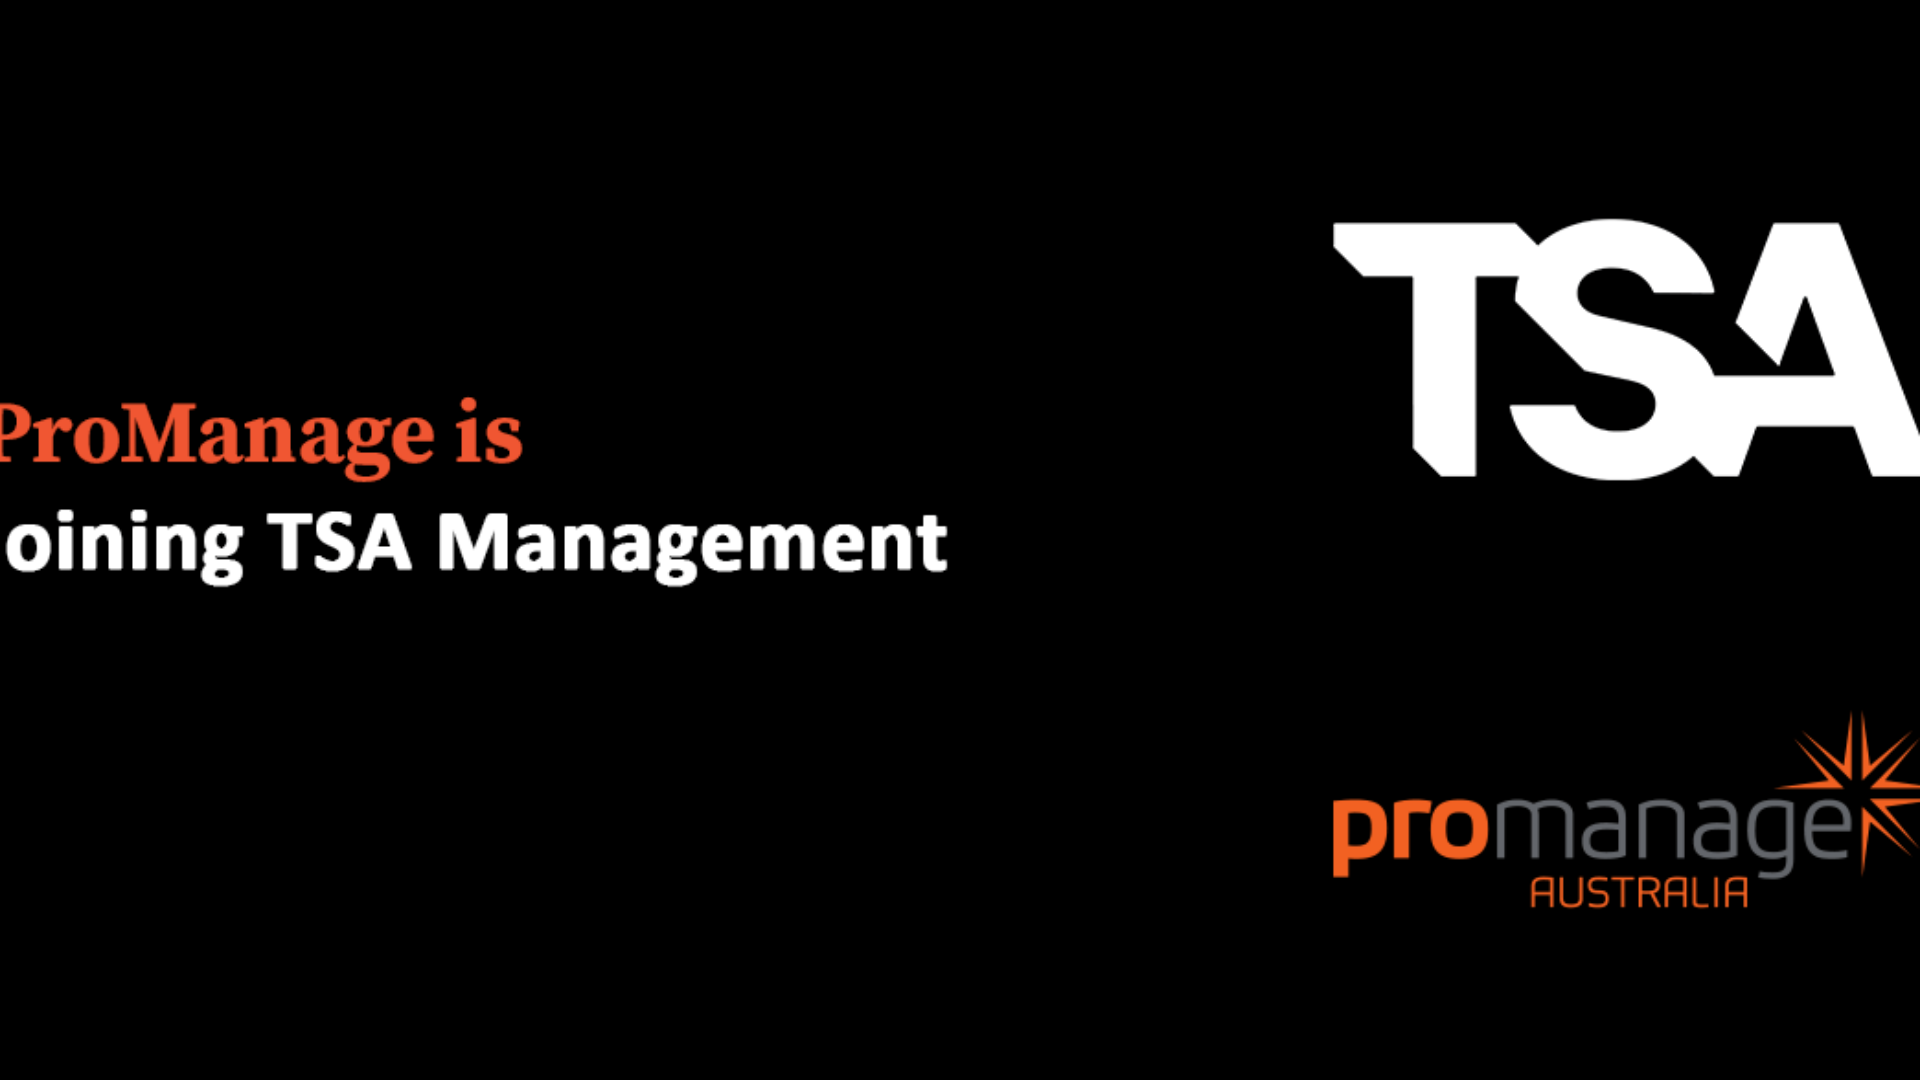 TSA announces ProManage will join Australasian project management group